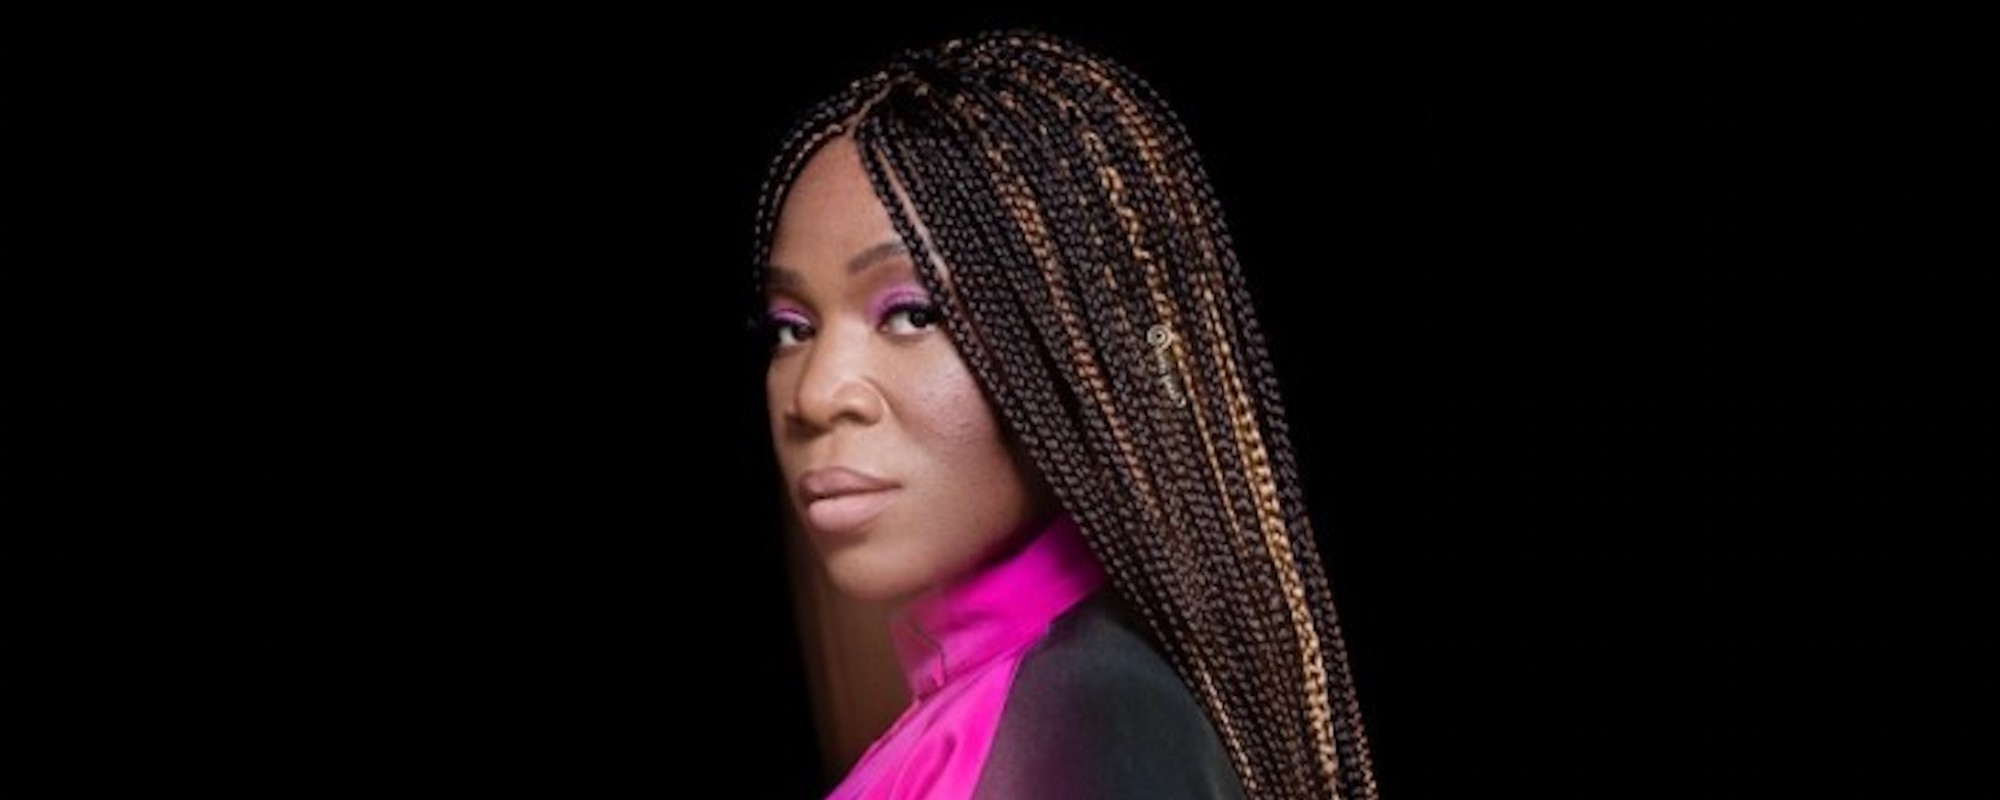 India.Arie Talks Leaving Spotify, Shares Video of Joe Rogan Saying the N-Word Repeatedly; Spotify Pulls 70 Episodes as 20% of Users Are Out